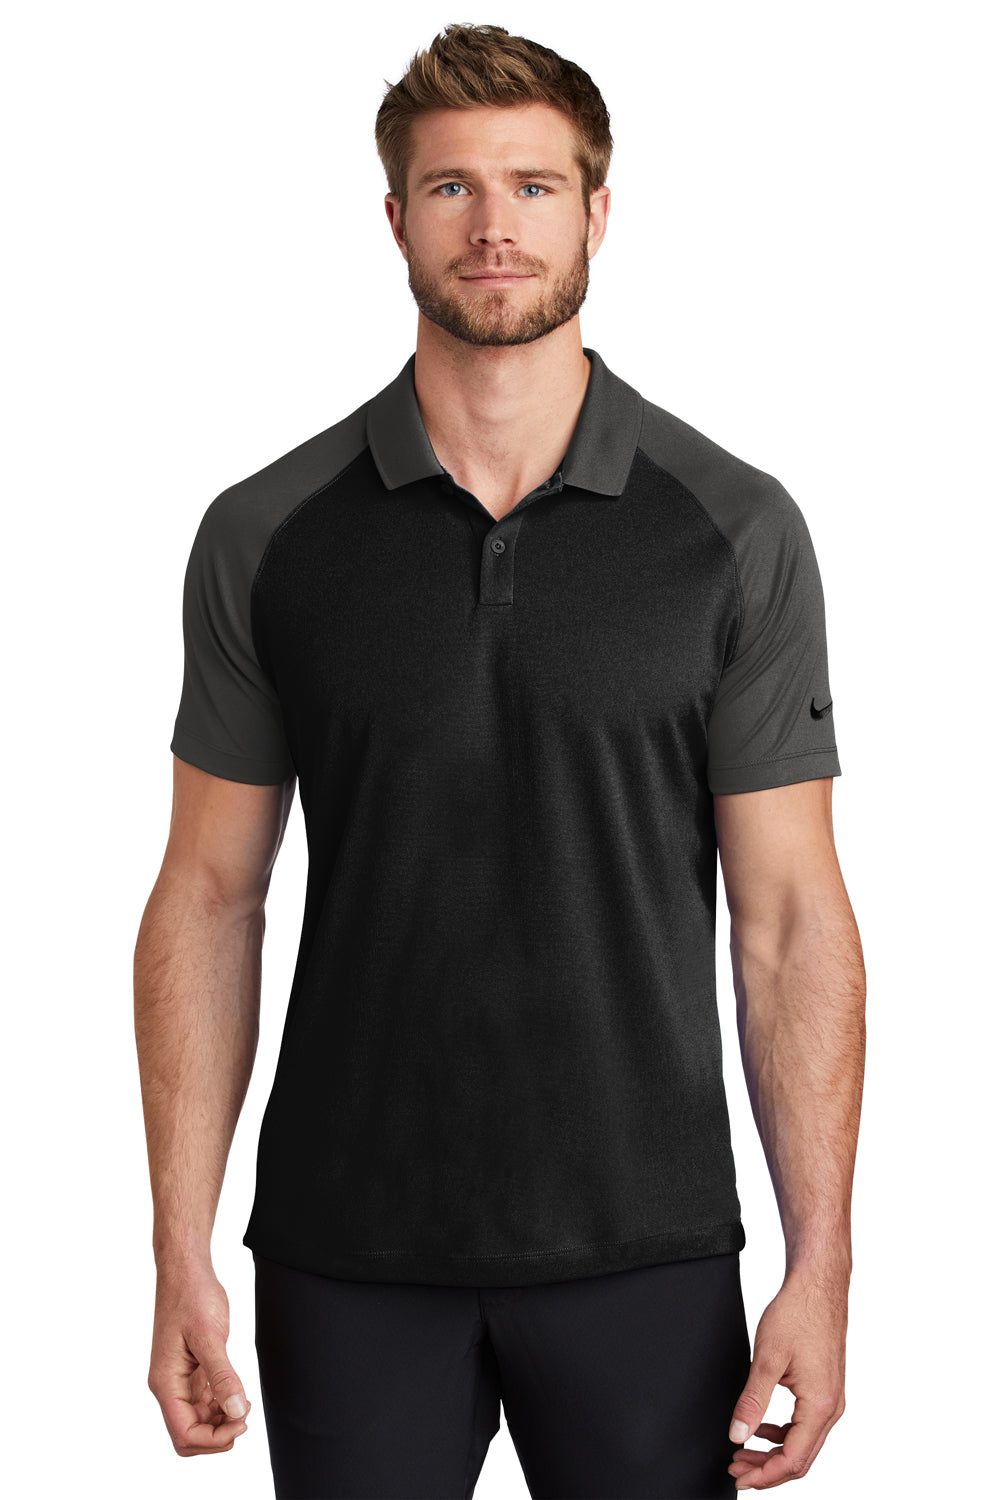 Nike Mens Dry Short Sleeve Polo Shirt Black/Anthracite Grey Front